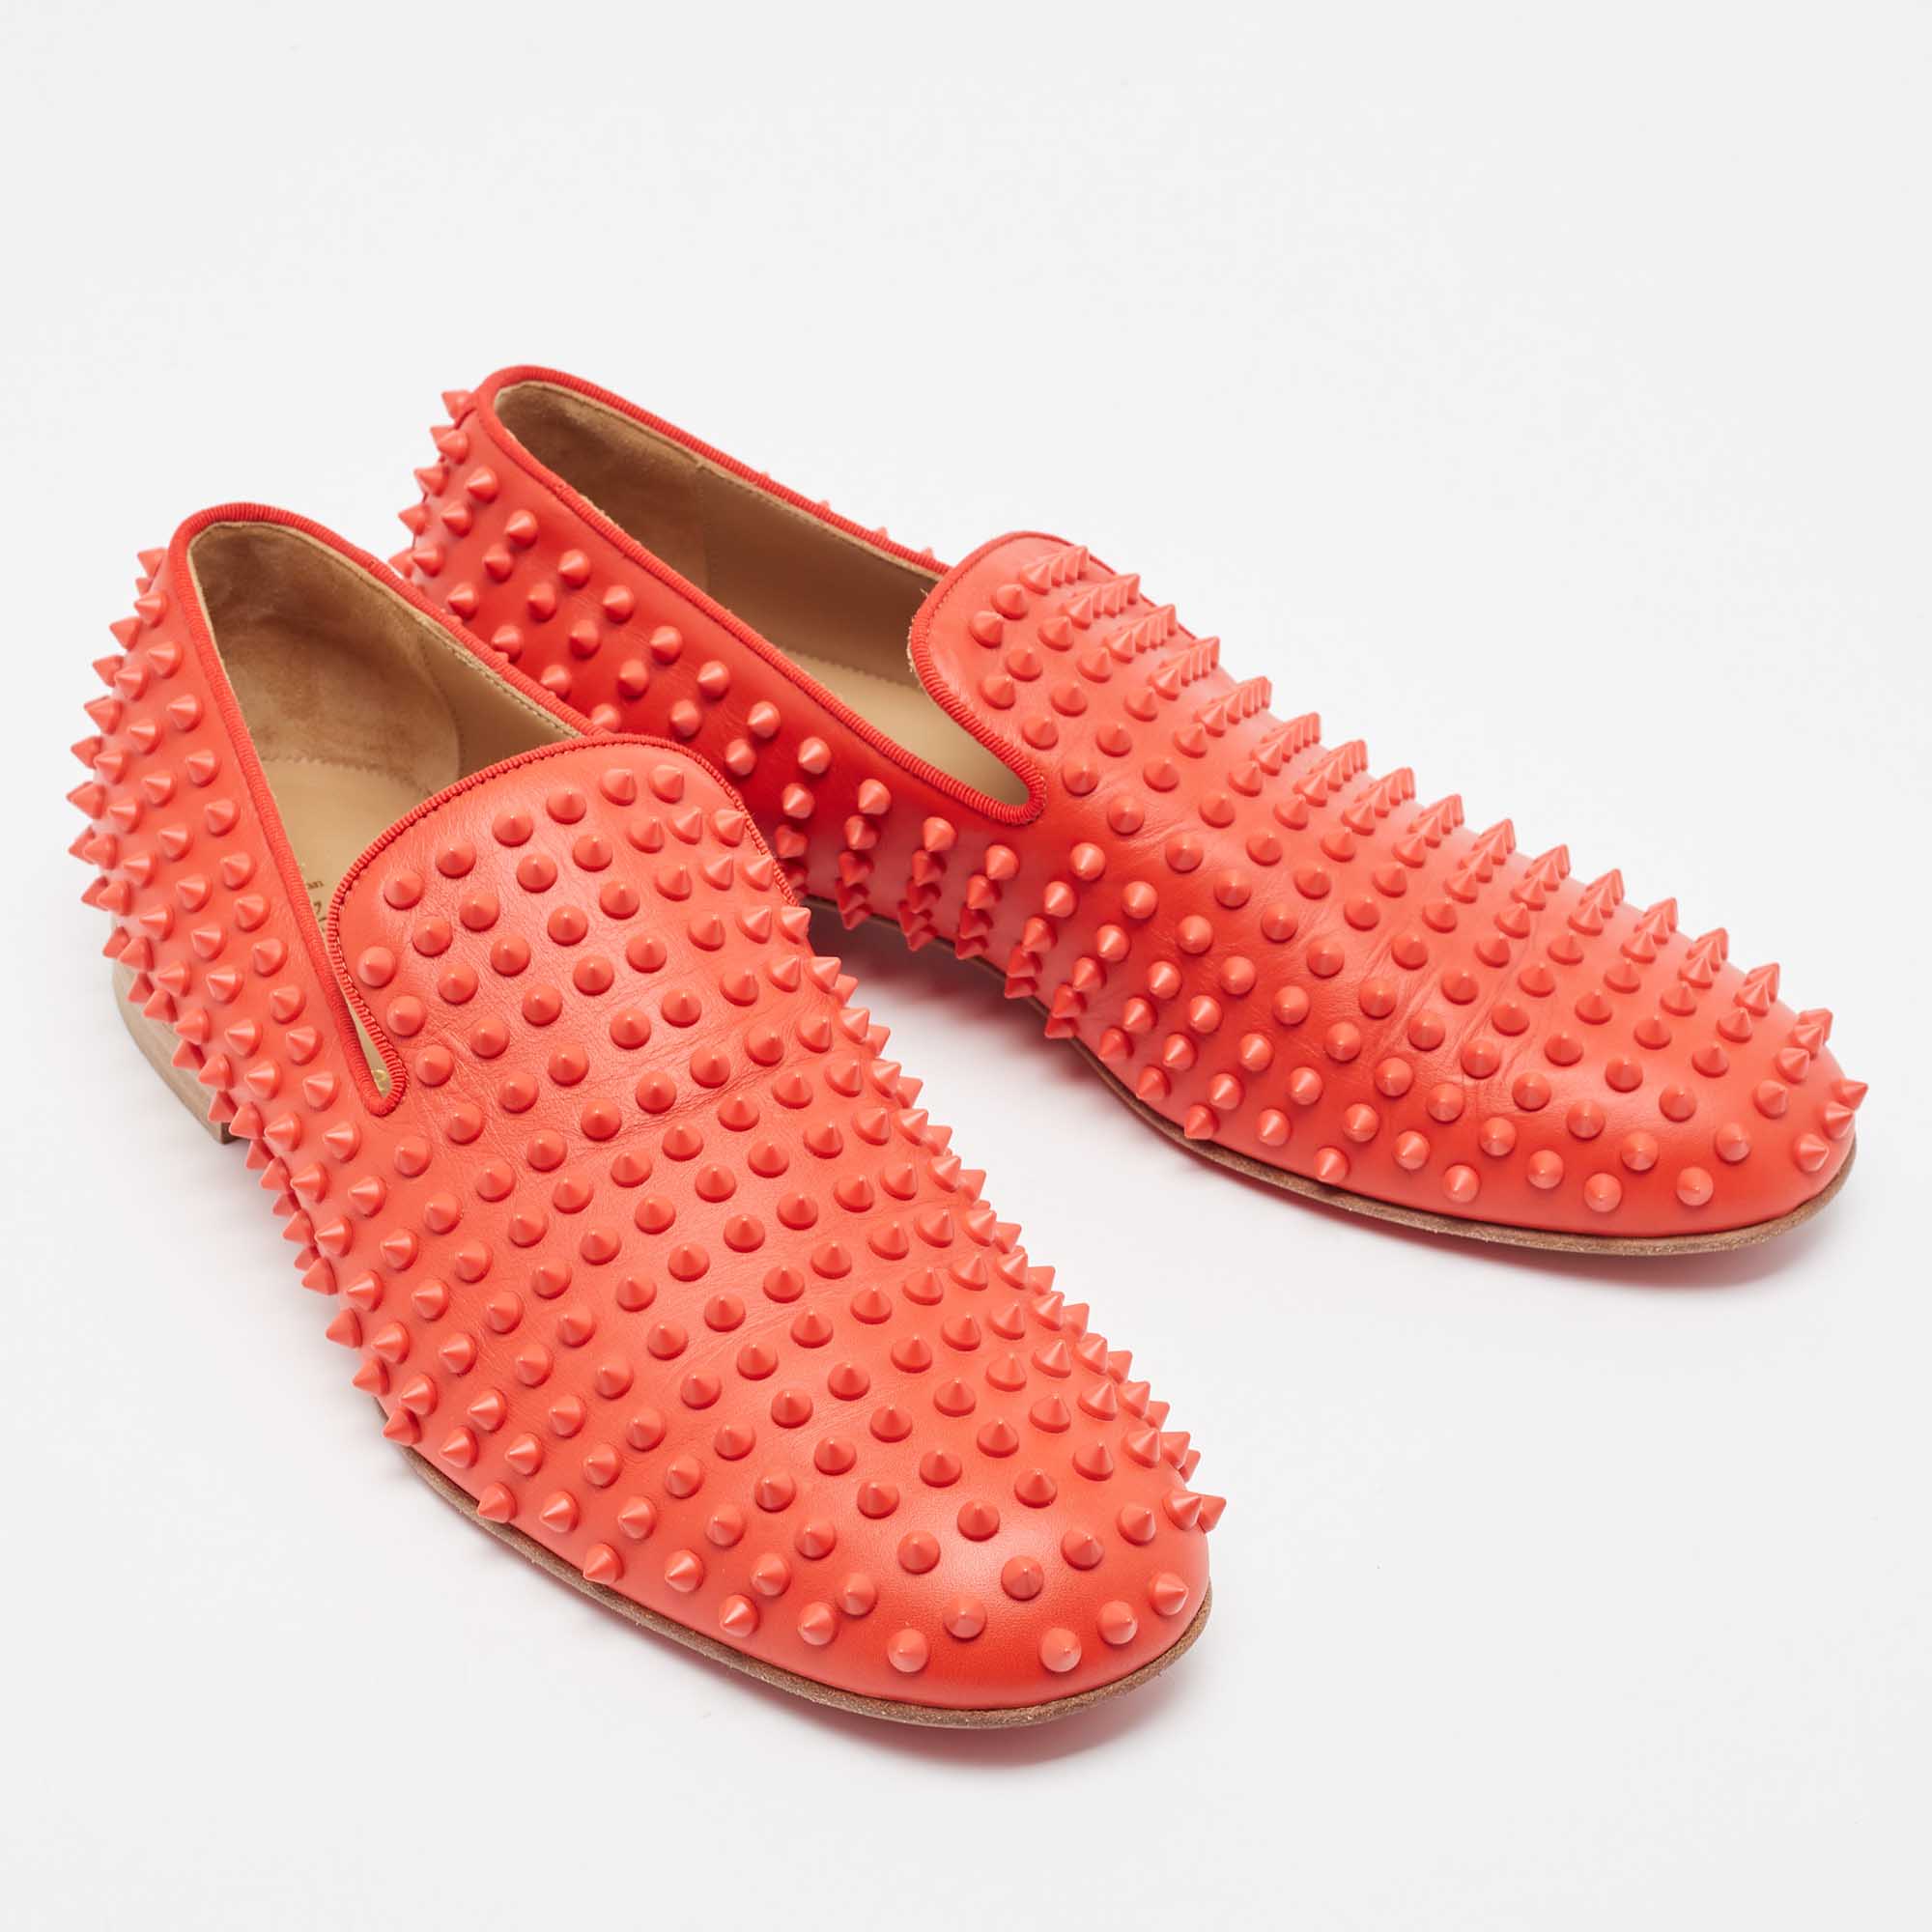 Christian Louboutin Red Leather Rollerboy Spikes Slip on Smoking Slippers Size 42